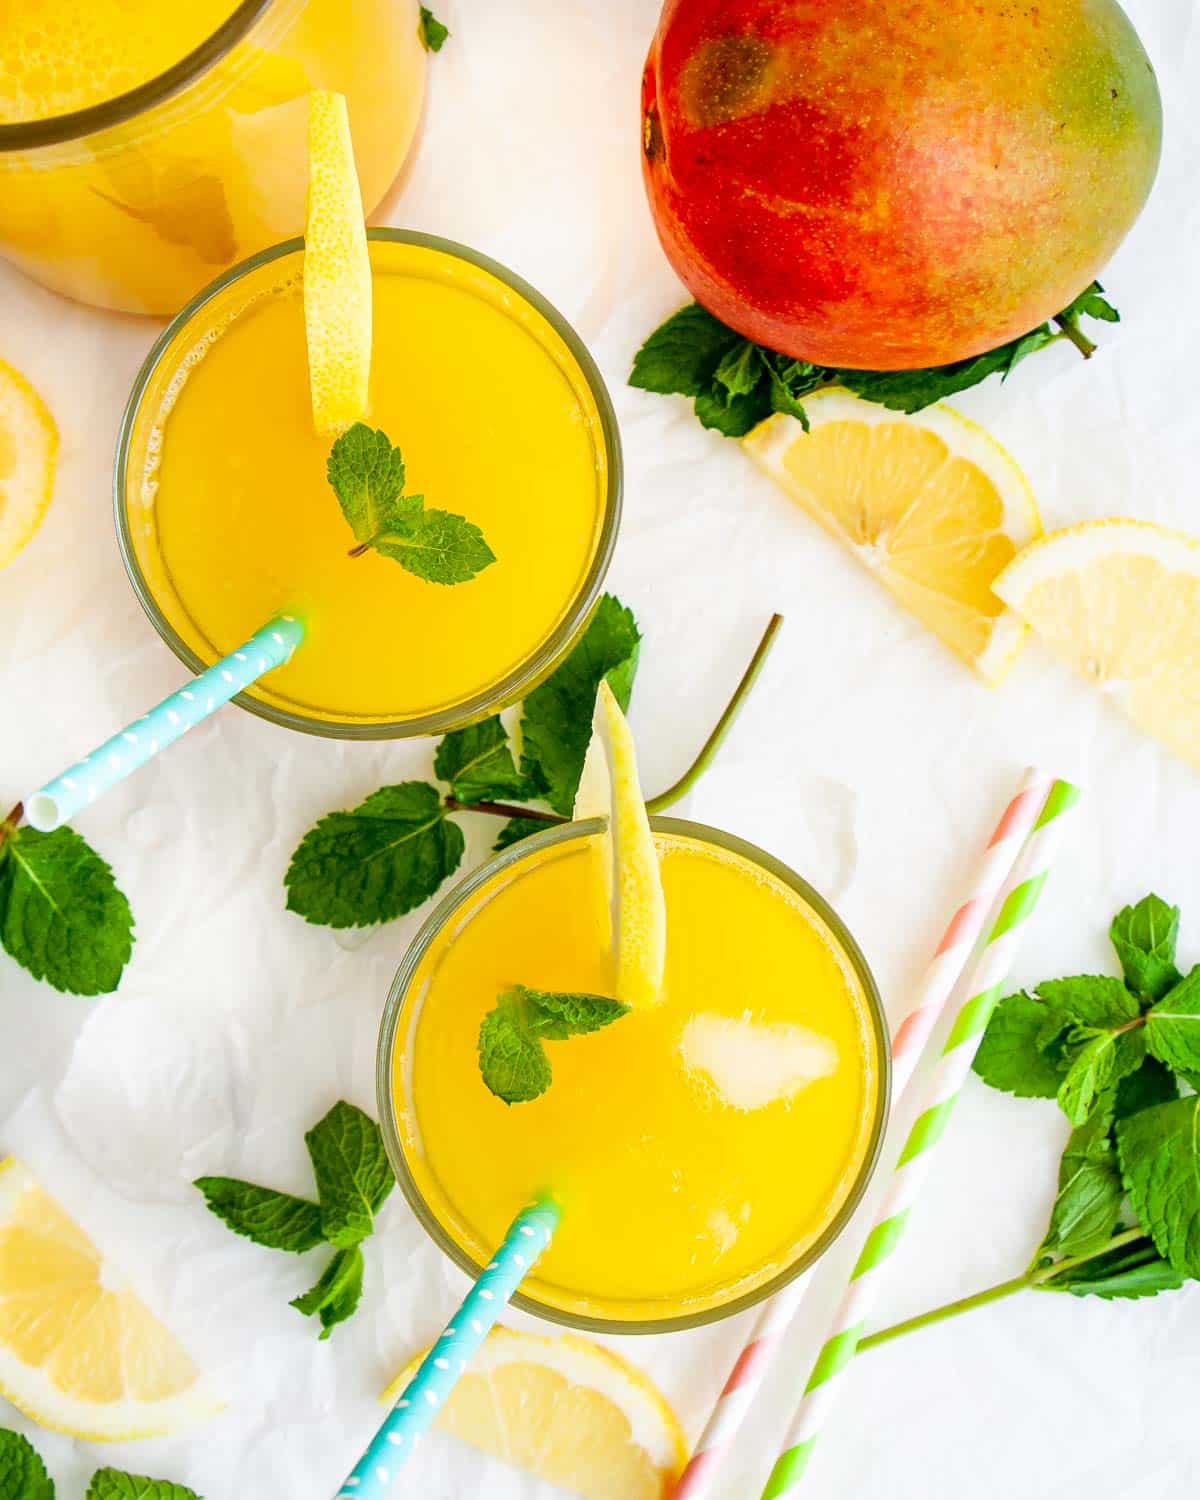 two glasses filled with mango lemonade with a mango next to them garnished with lemon slices and a mint leaf